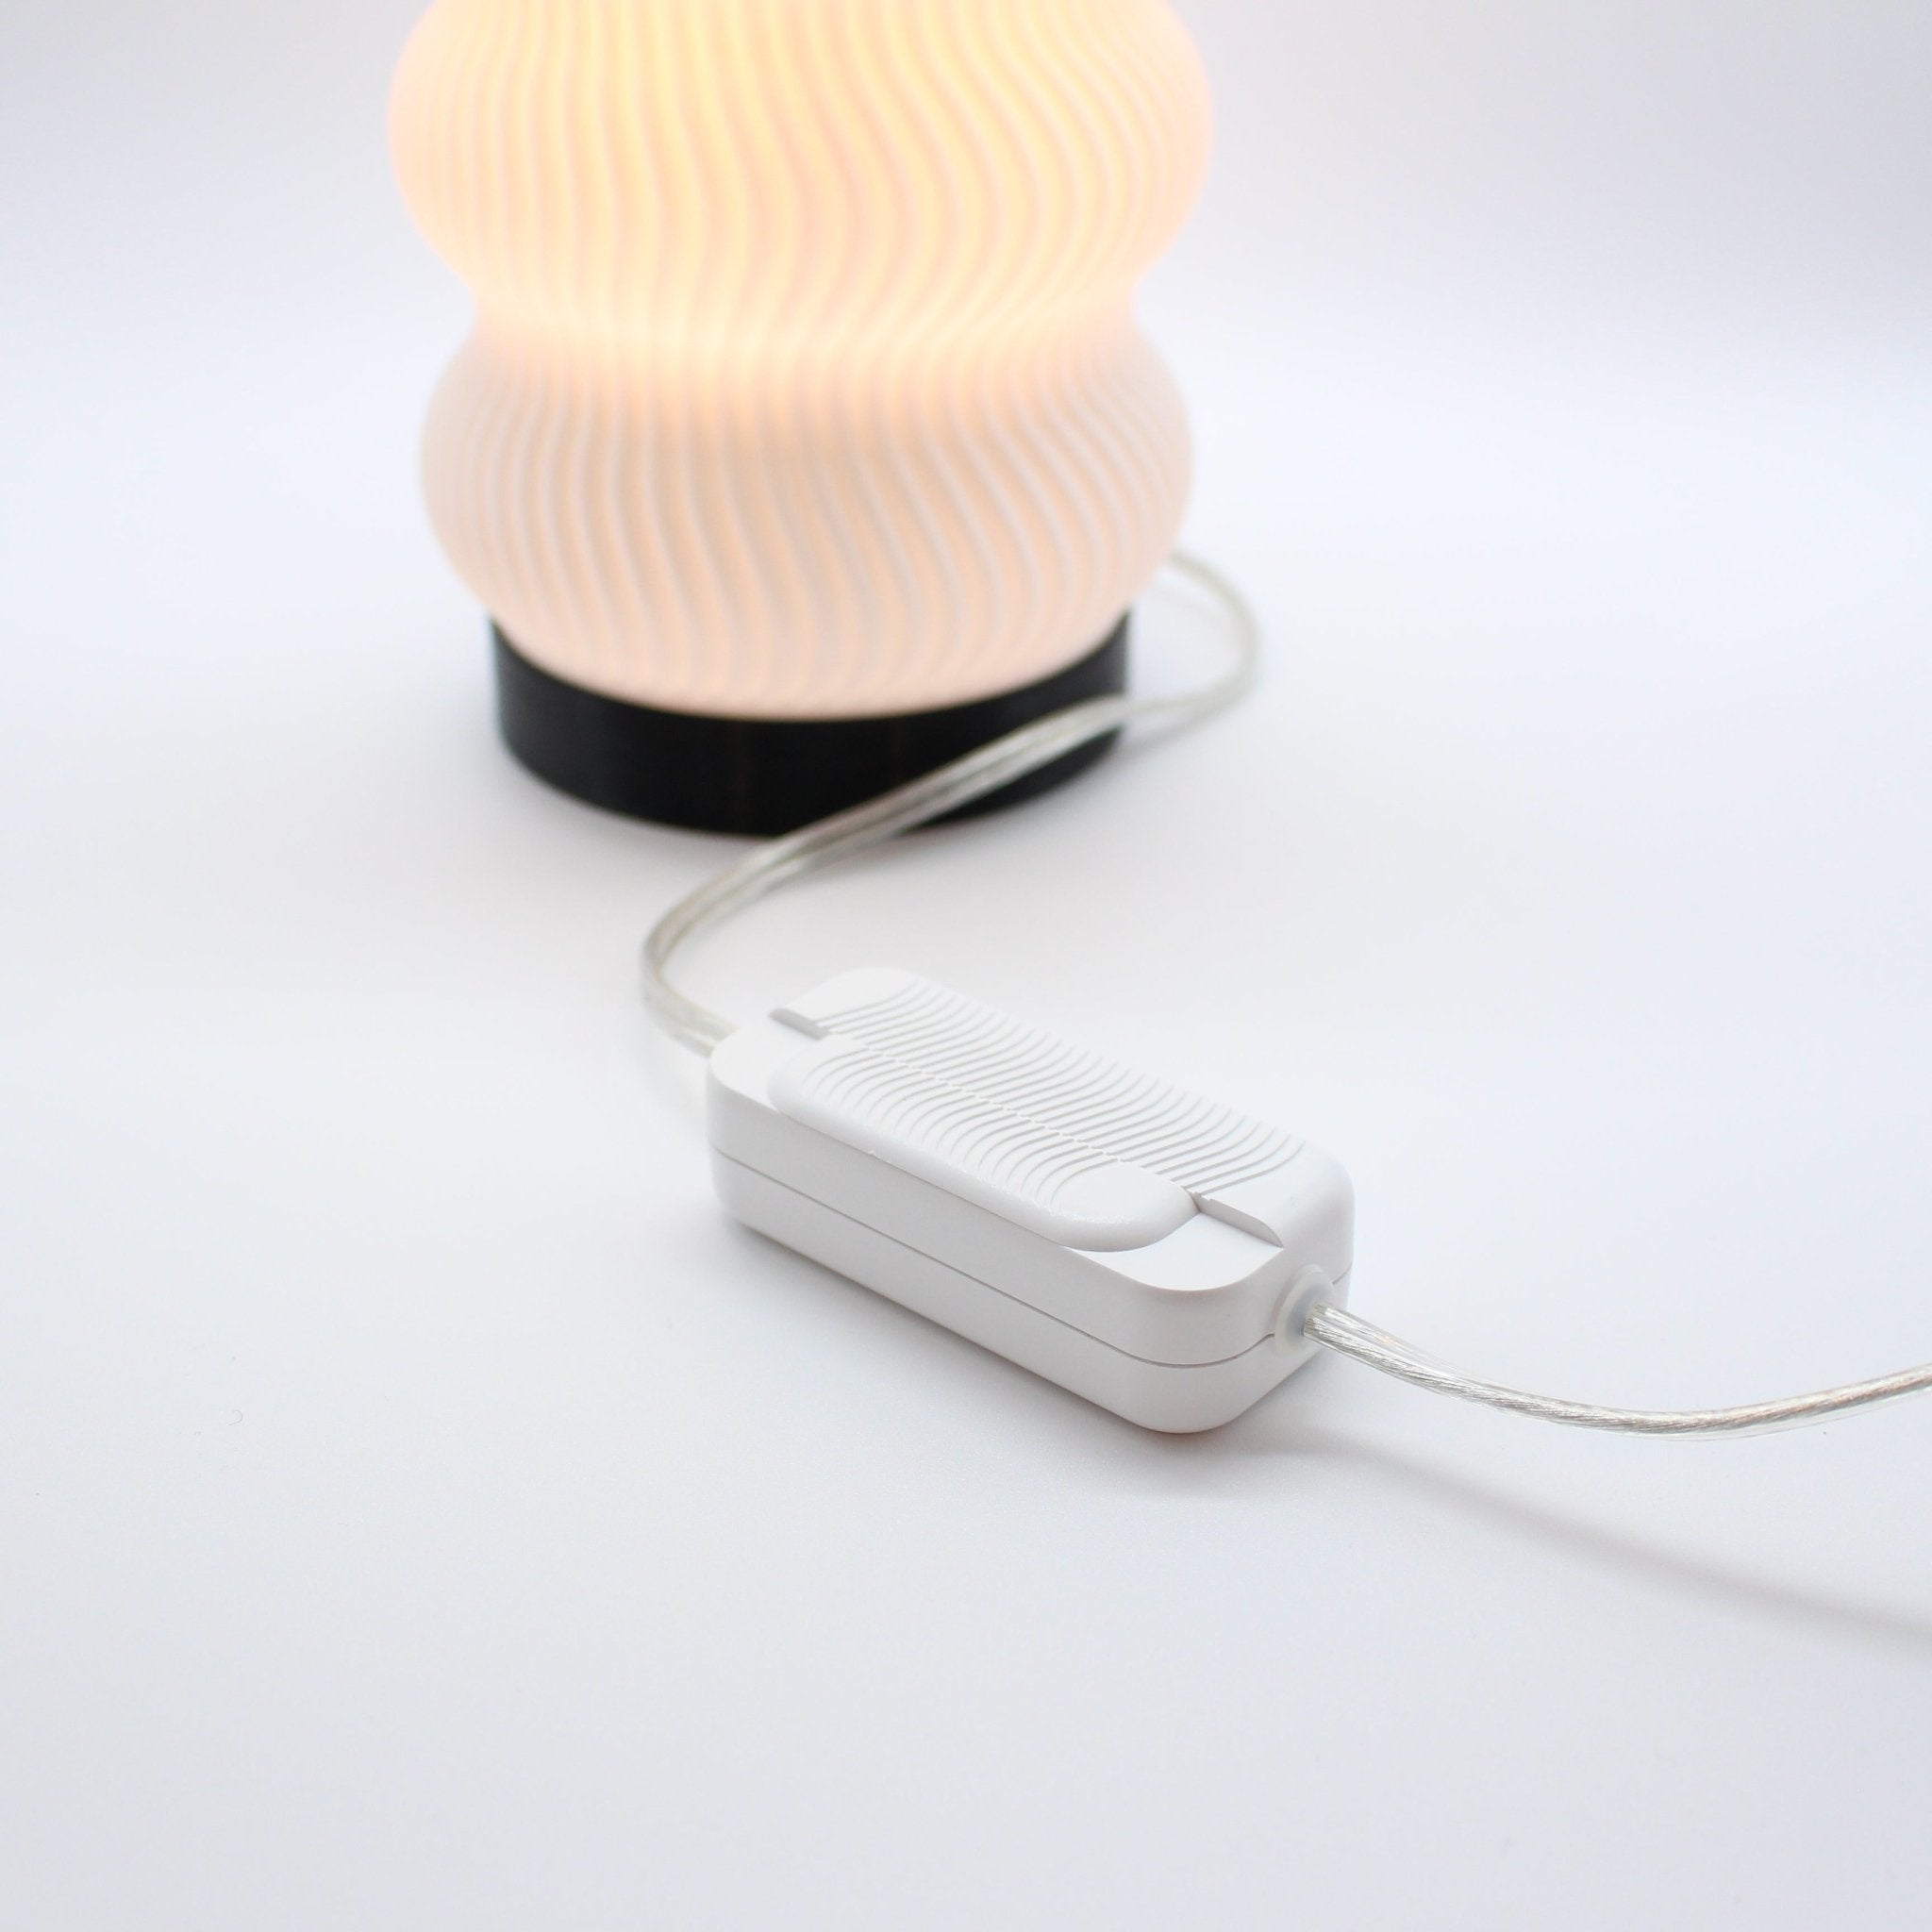 Kyma Table Lamp Dimmer Switch, 3D Printed Recycled Plastic, Deme Design